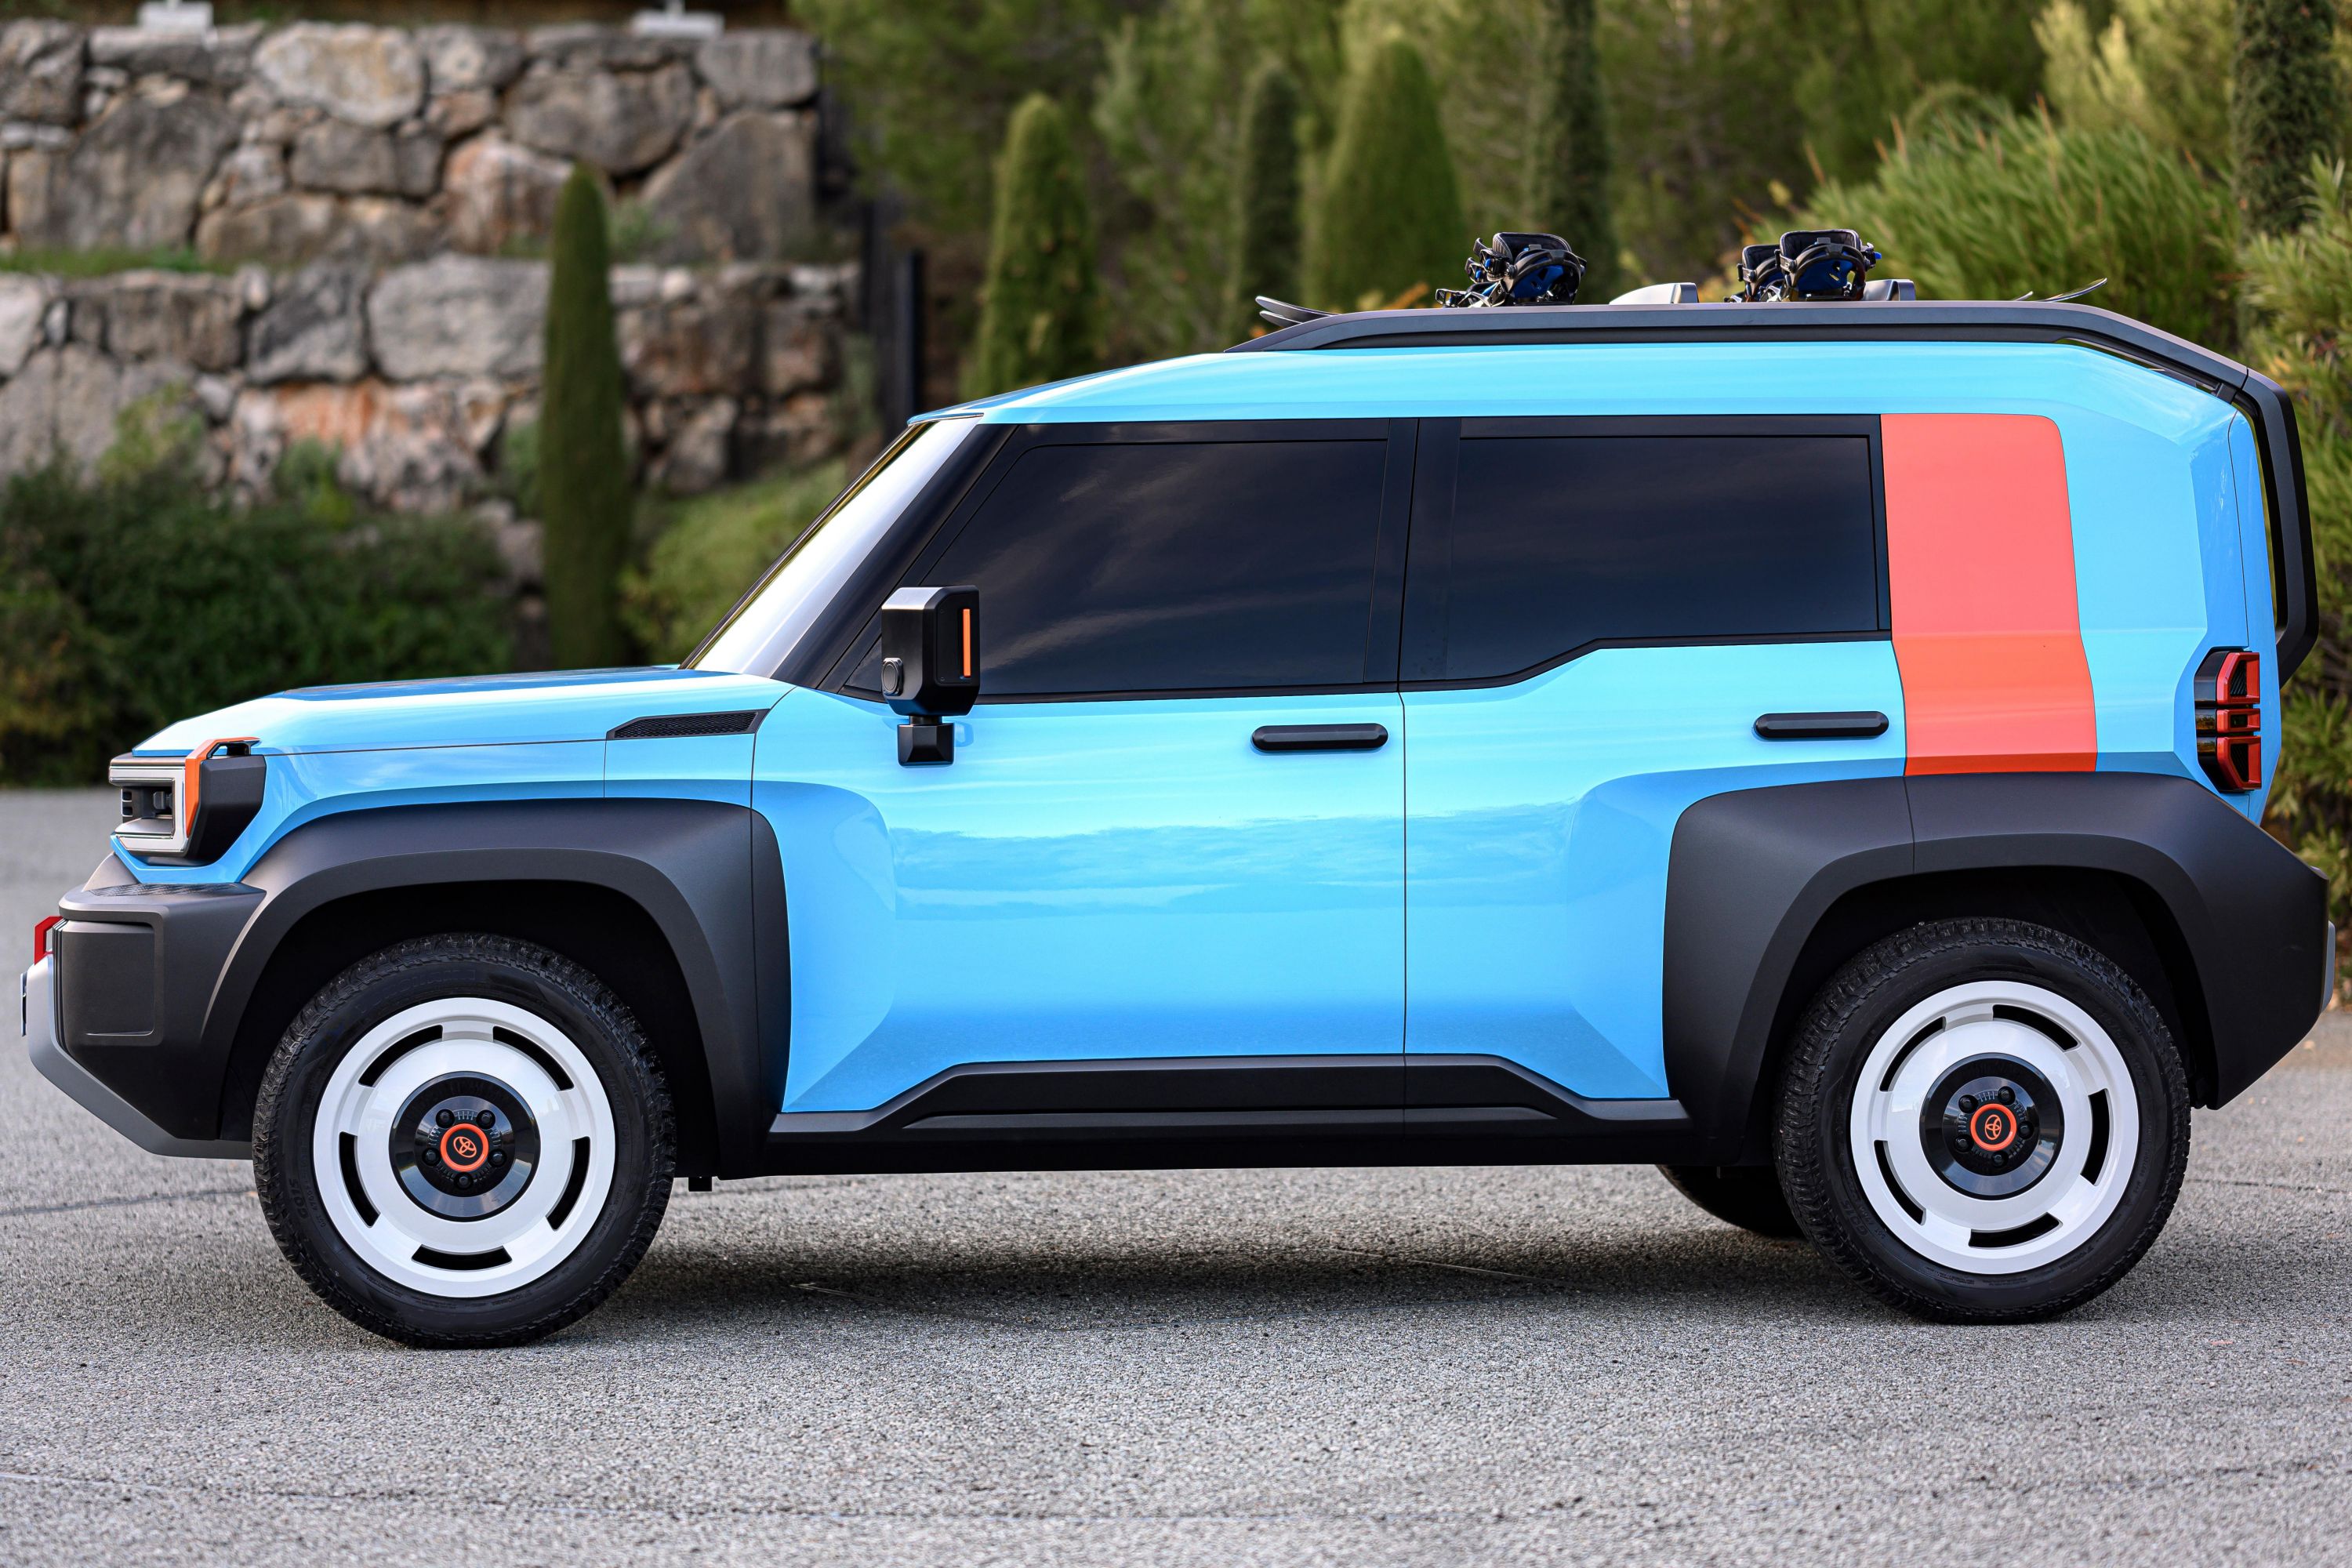 Toyota Compact Cruiser EV offroader revealed in more detail CarExpert